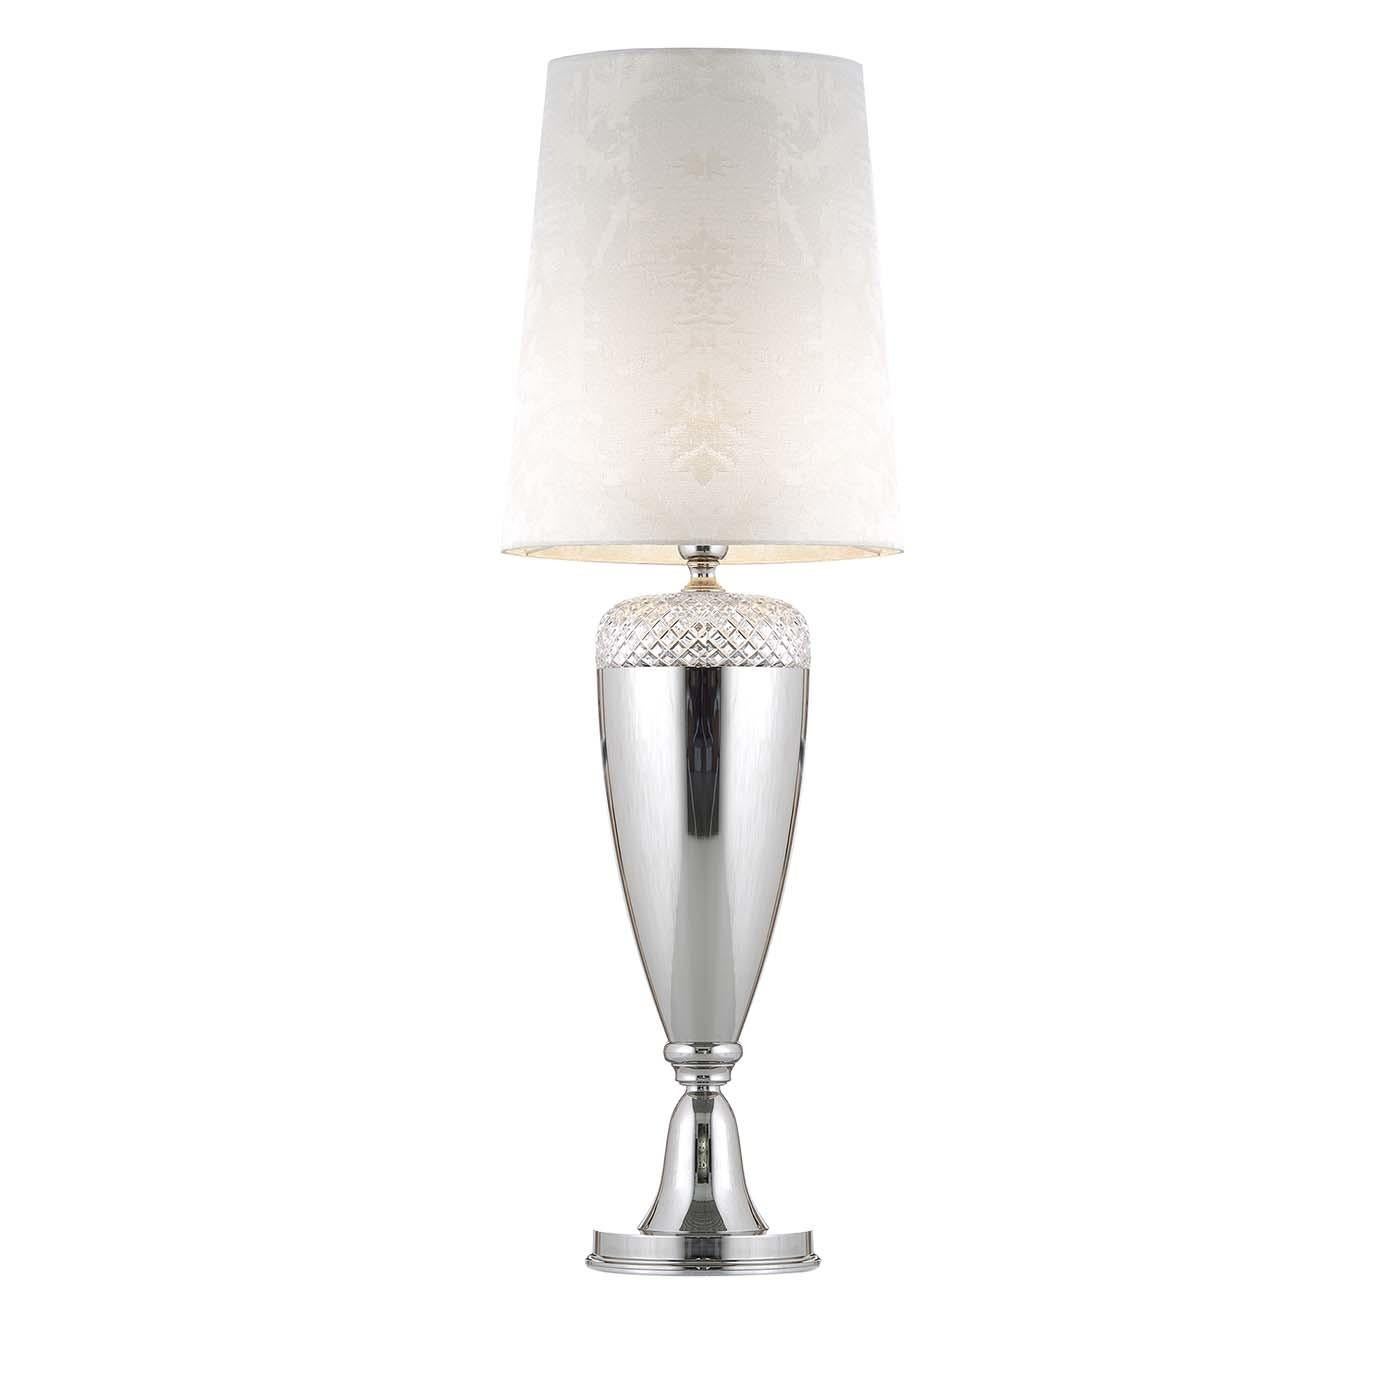 This stunning table lamp combines the smooth and glossy surface of a sinuous base in metal with its top, adorned with a superb handcut, 24 lead Italian crystals. The shade's structure in PVC is covered in an elegant fabric from the Ruskin collection